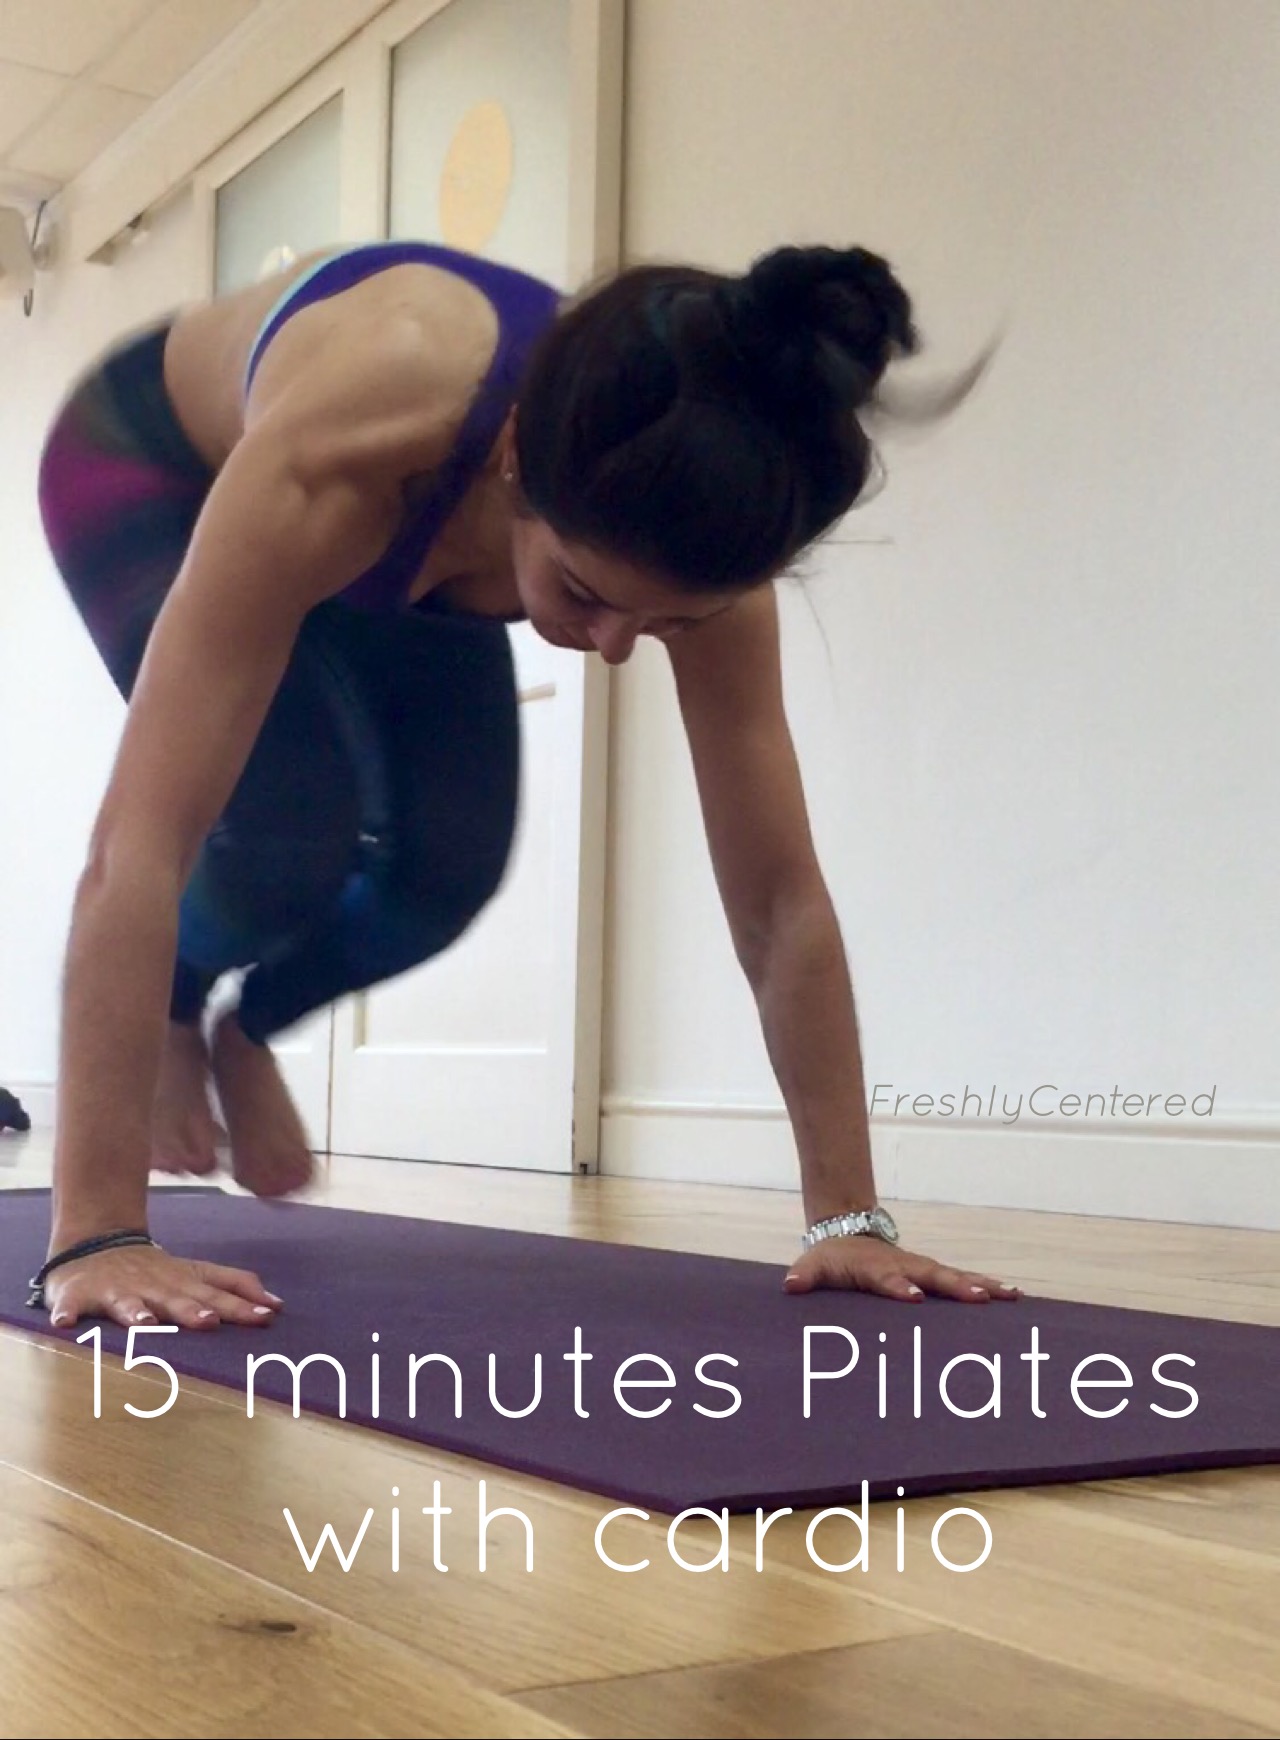 15 minutes pilates with cardio